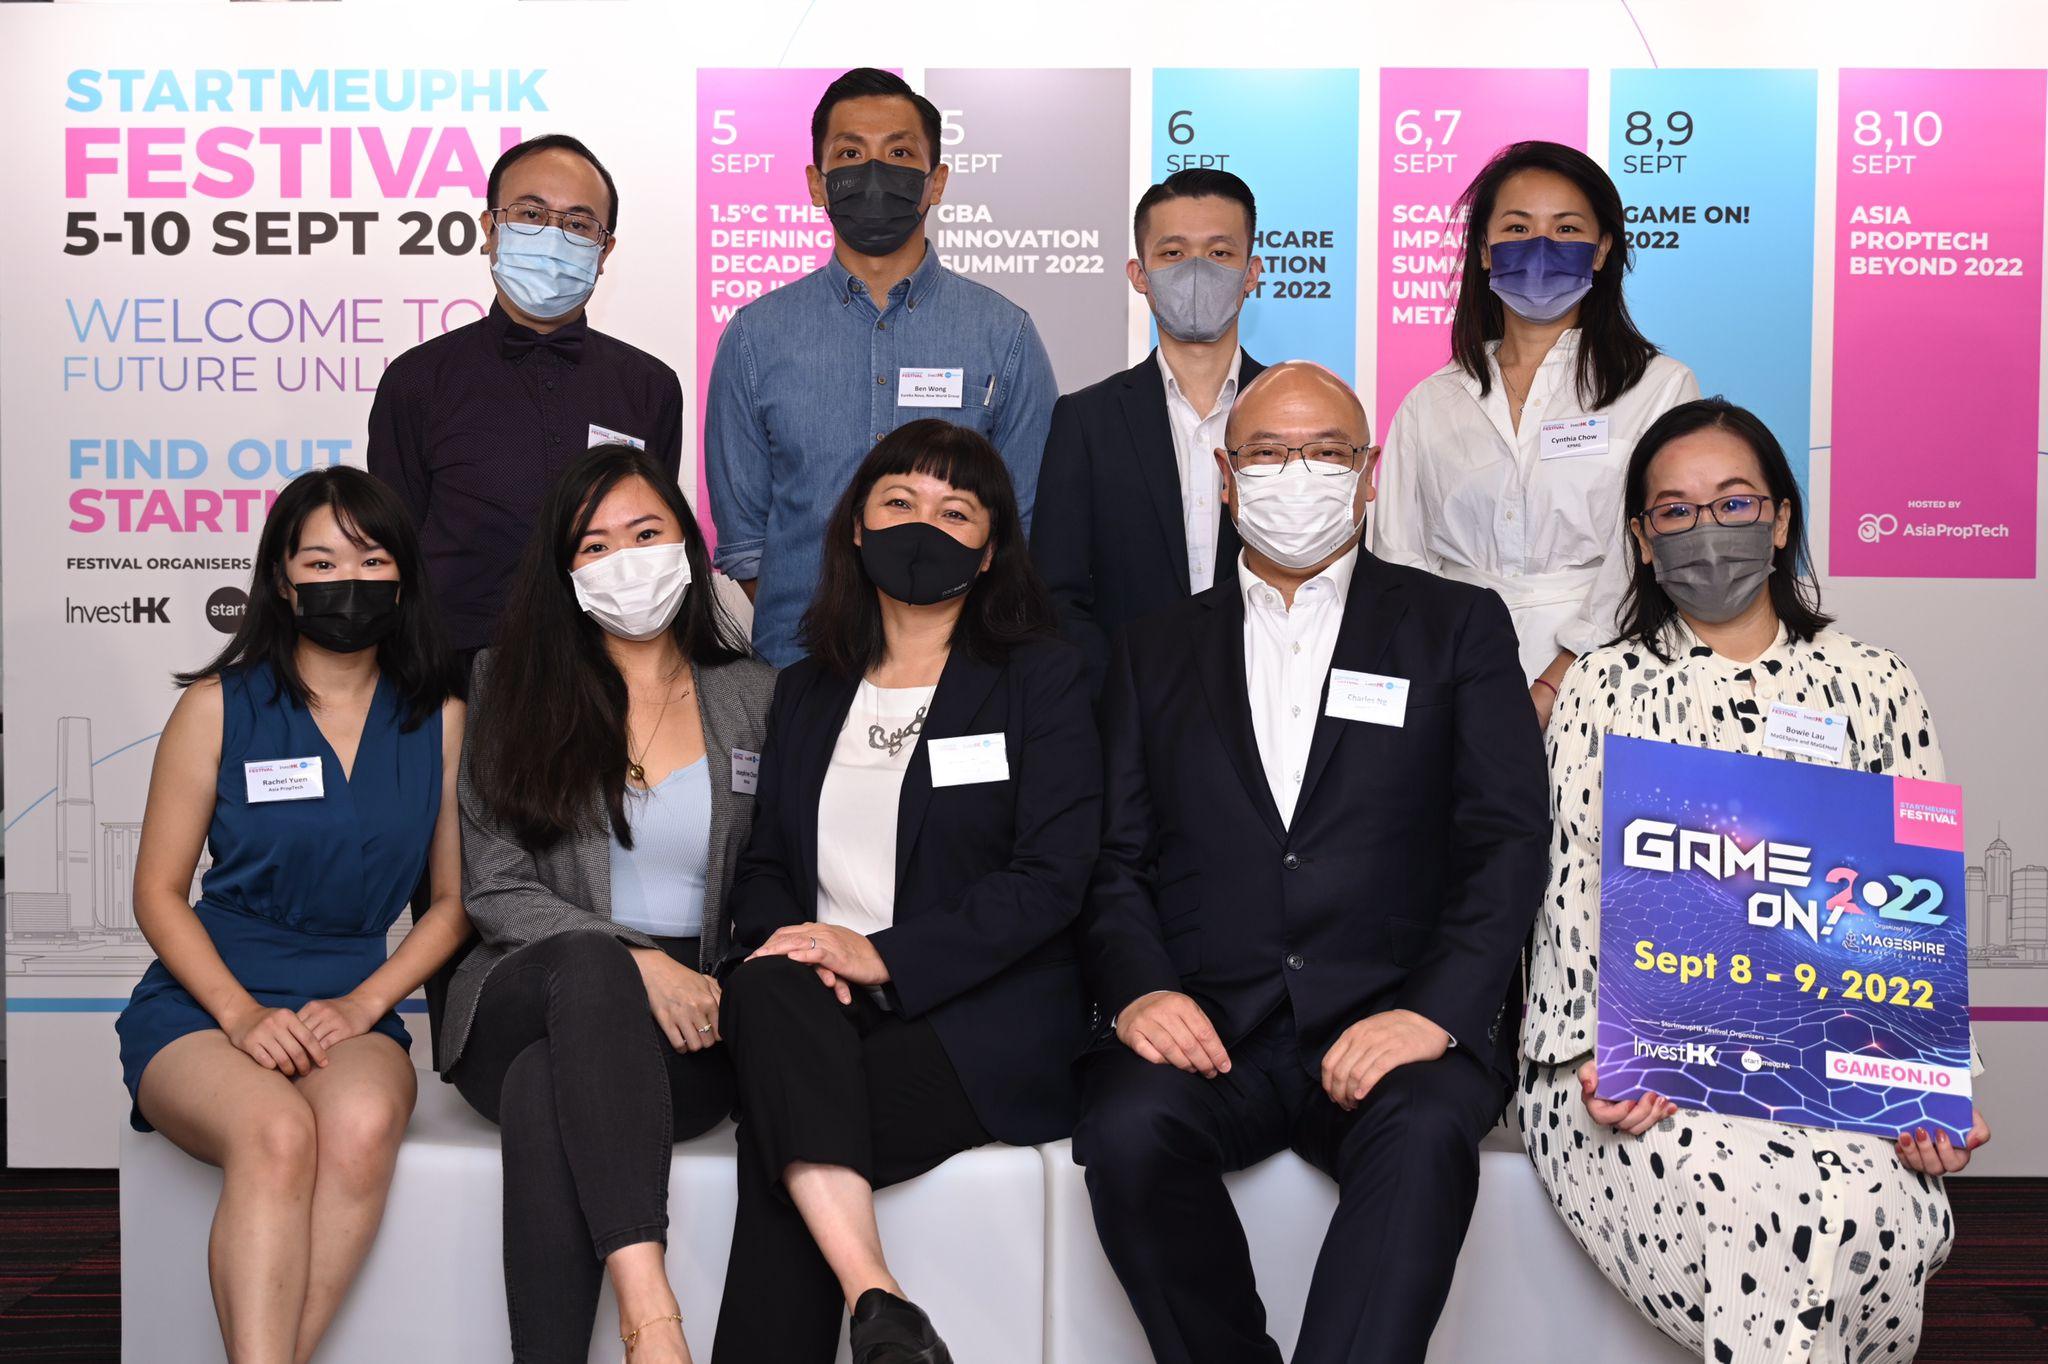 The annual StartmeupHK Festival curated by Invest Hong Kong (InvestHK) returns in a hybrid format on September 5 to 10 following last year's success. Photo shows representatives of InvestHK and event partners together for the StartmeupHK Festival 2022 preview.